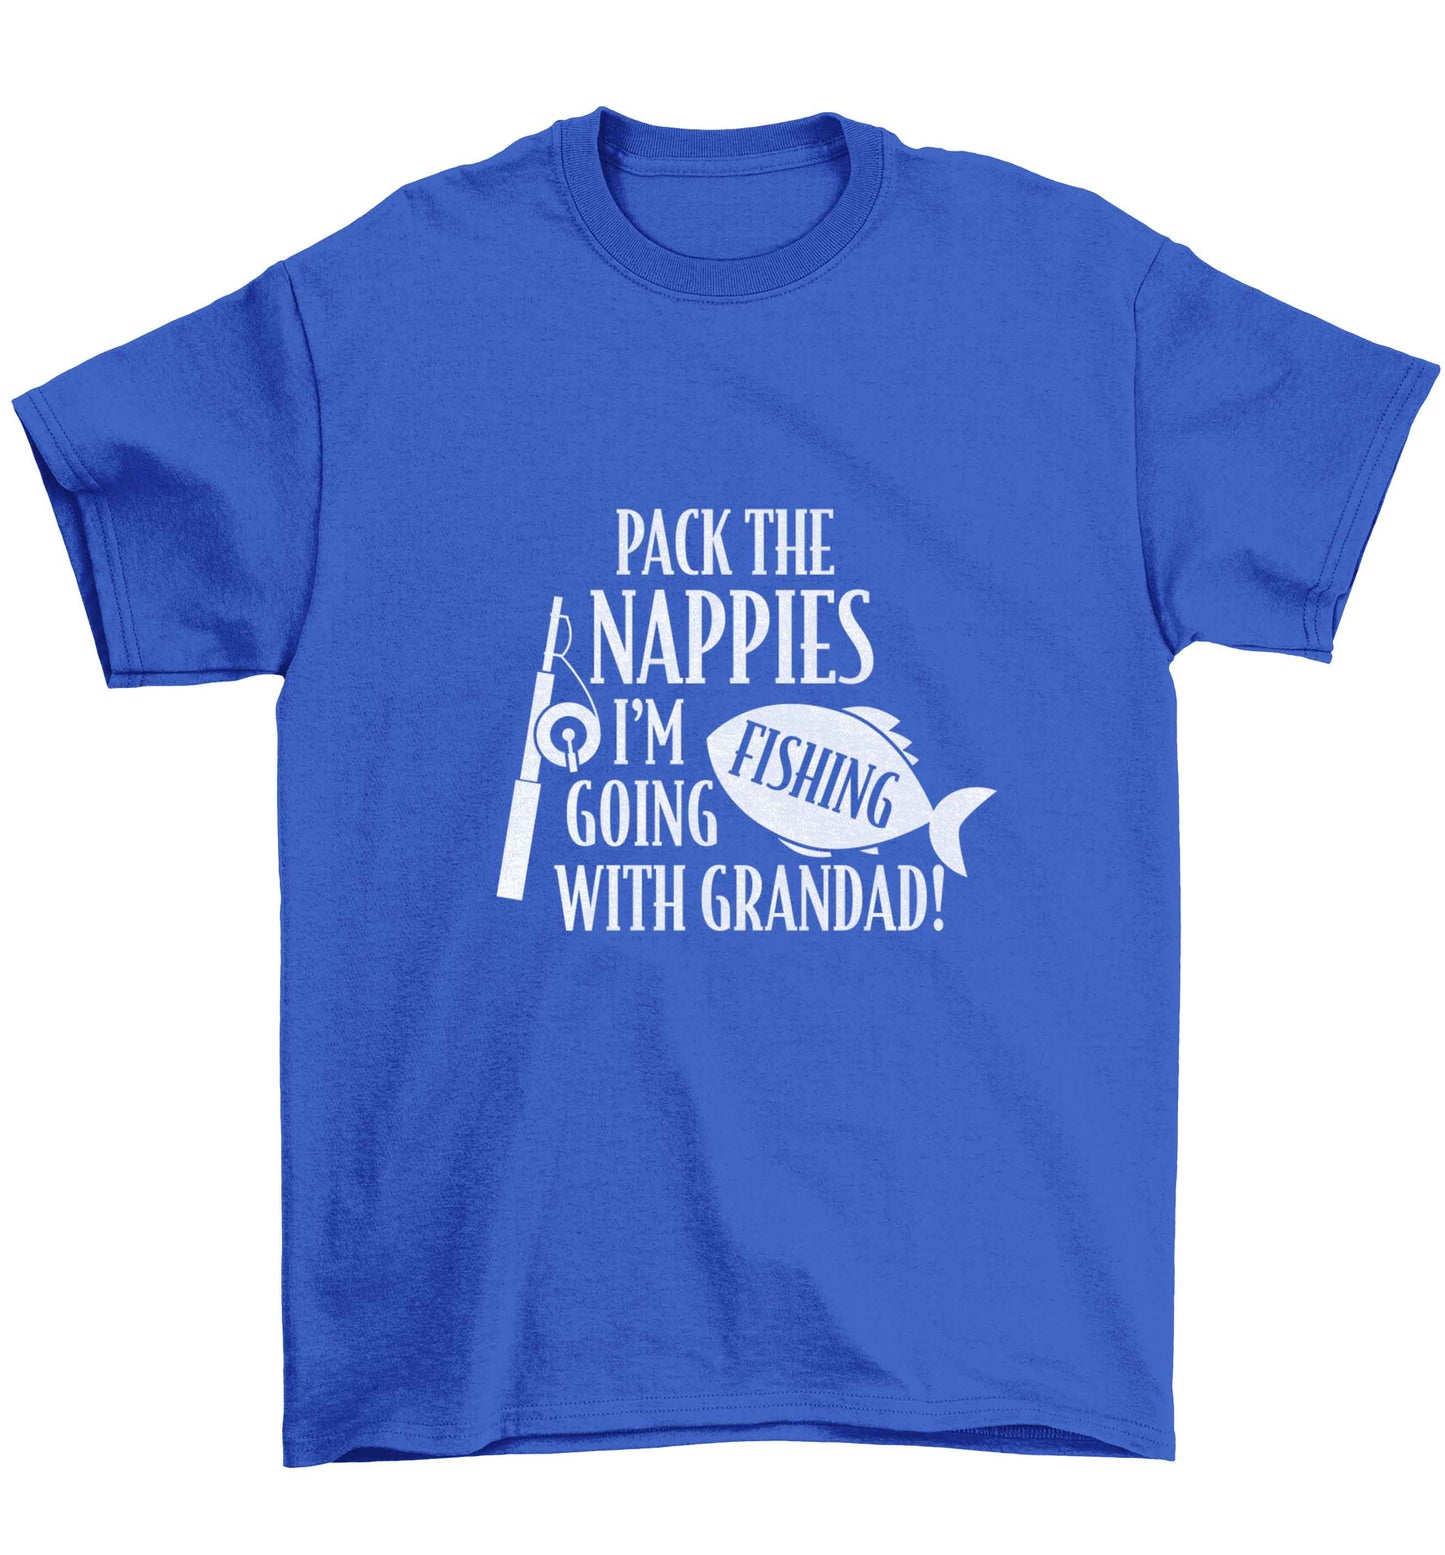 Pack the nappies I'm going fishing with Grandad Children's blue Tshirt 12-13 Years